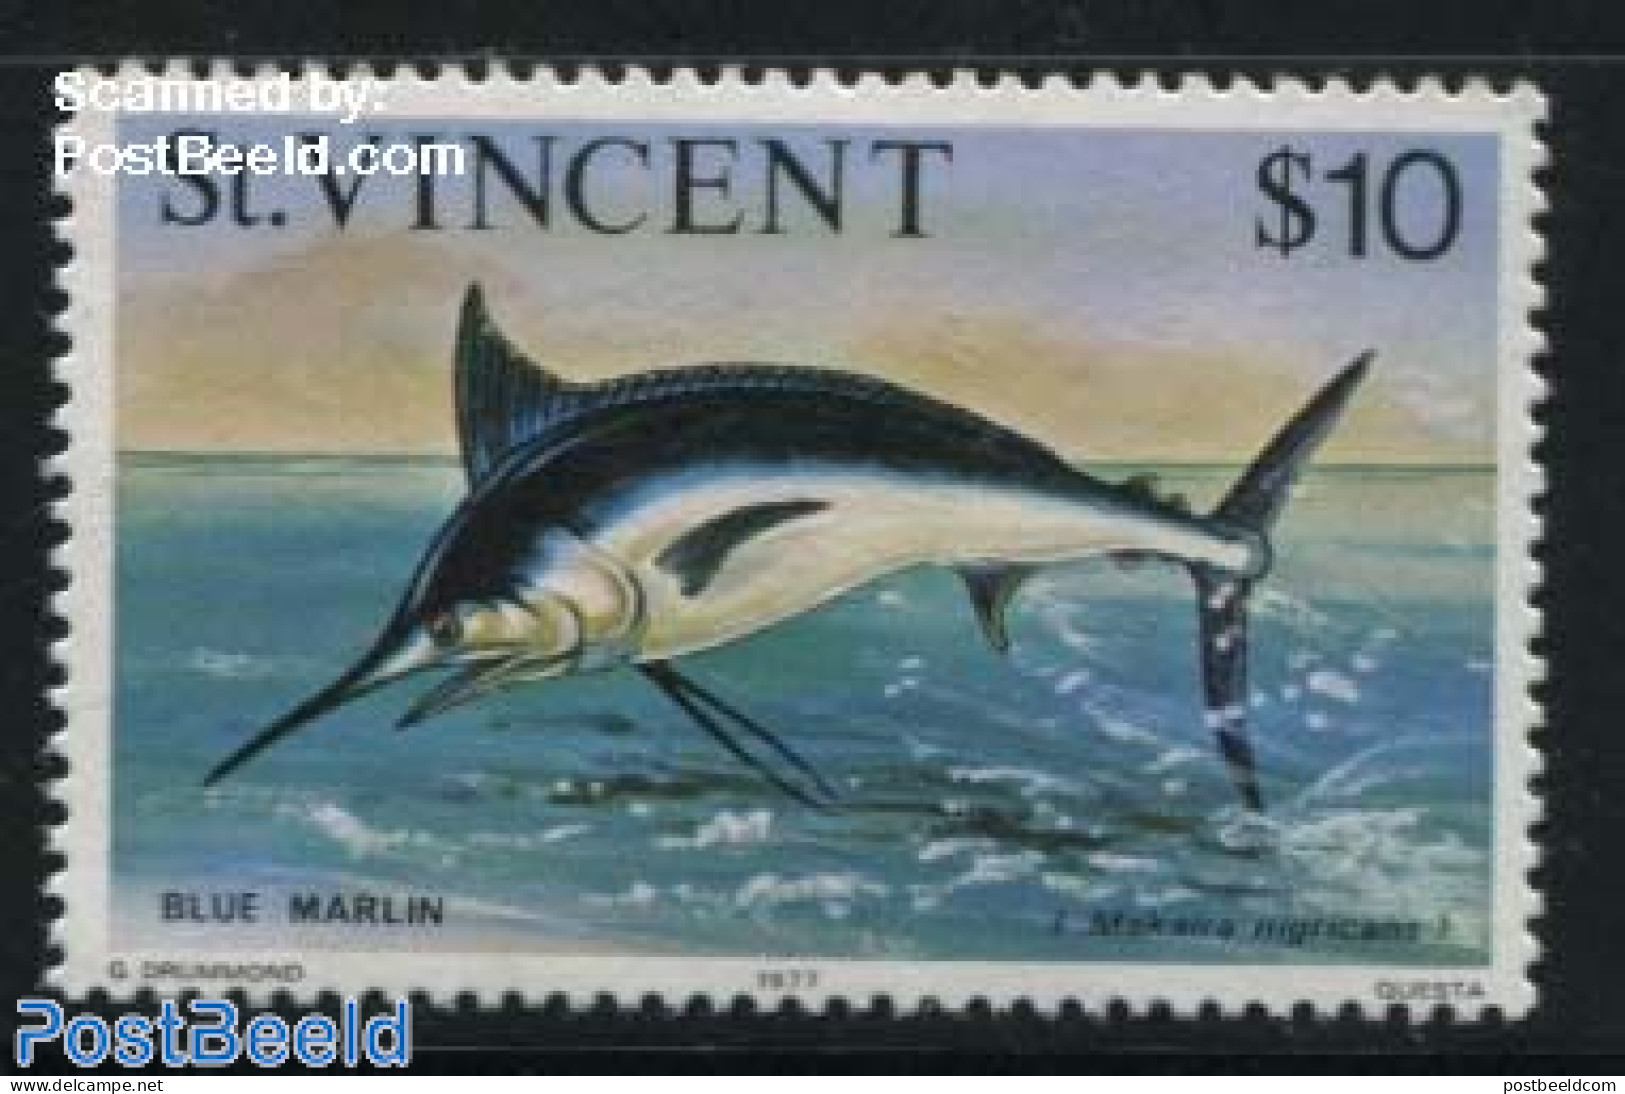 Saint Vincent 1977 $10, With Year 1977, Stamp Out Of Set, Mint NH, Nature - Fish - Poissons